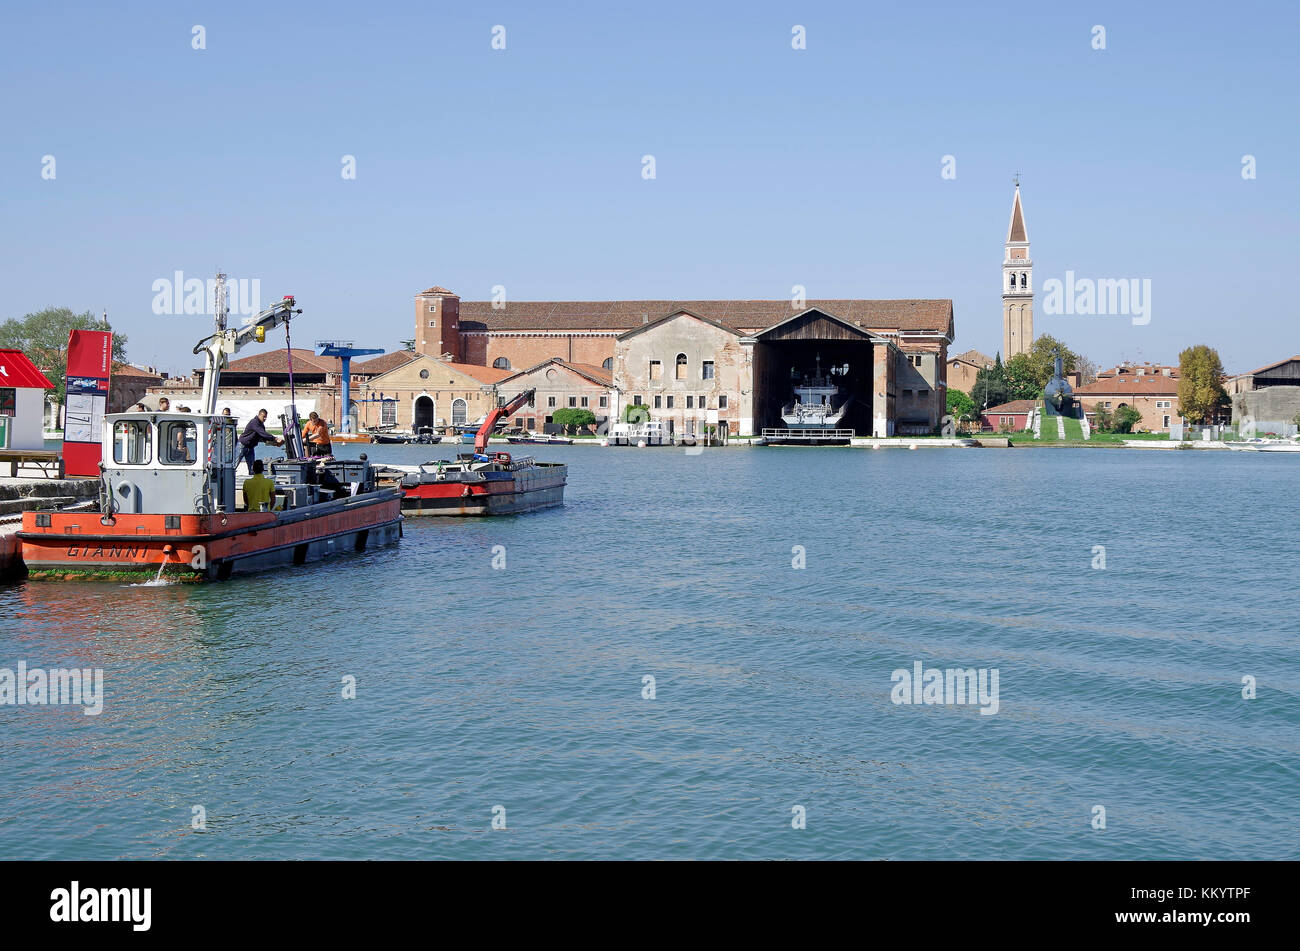 View across the large basin, Darsena Nuovissima, to the buildings on the West side, Stock Photo